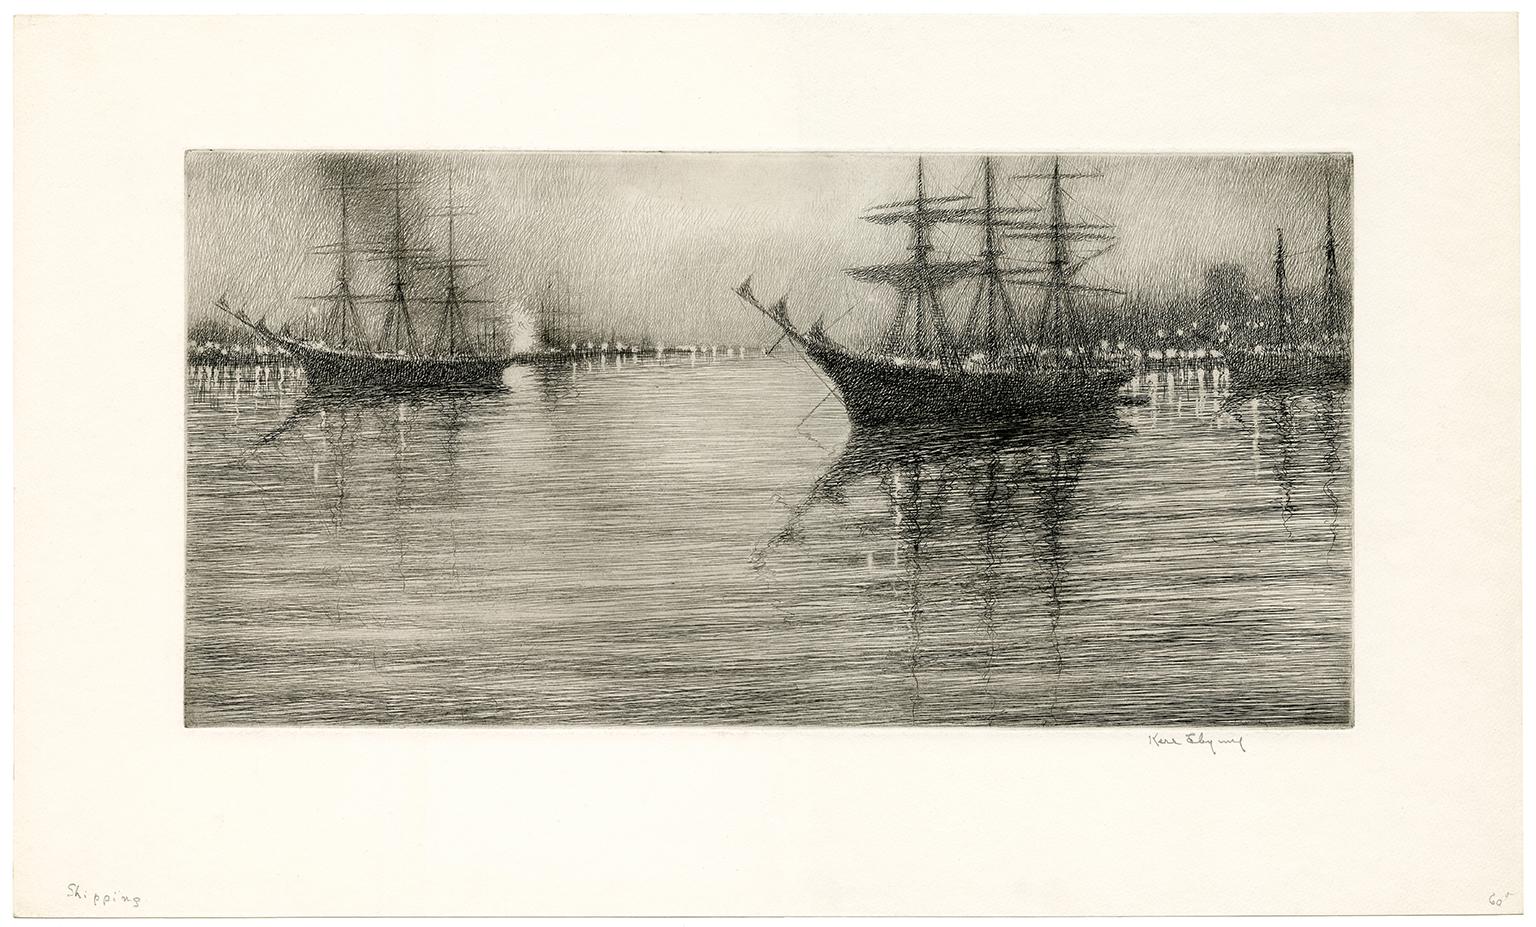 Shipping - Print by Kerr Eby